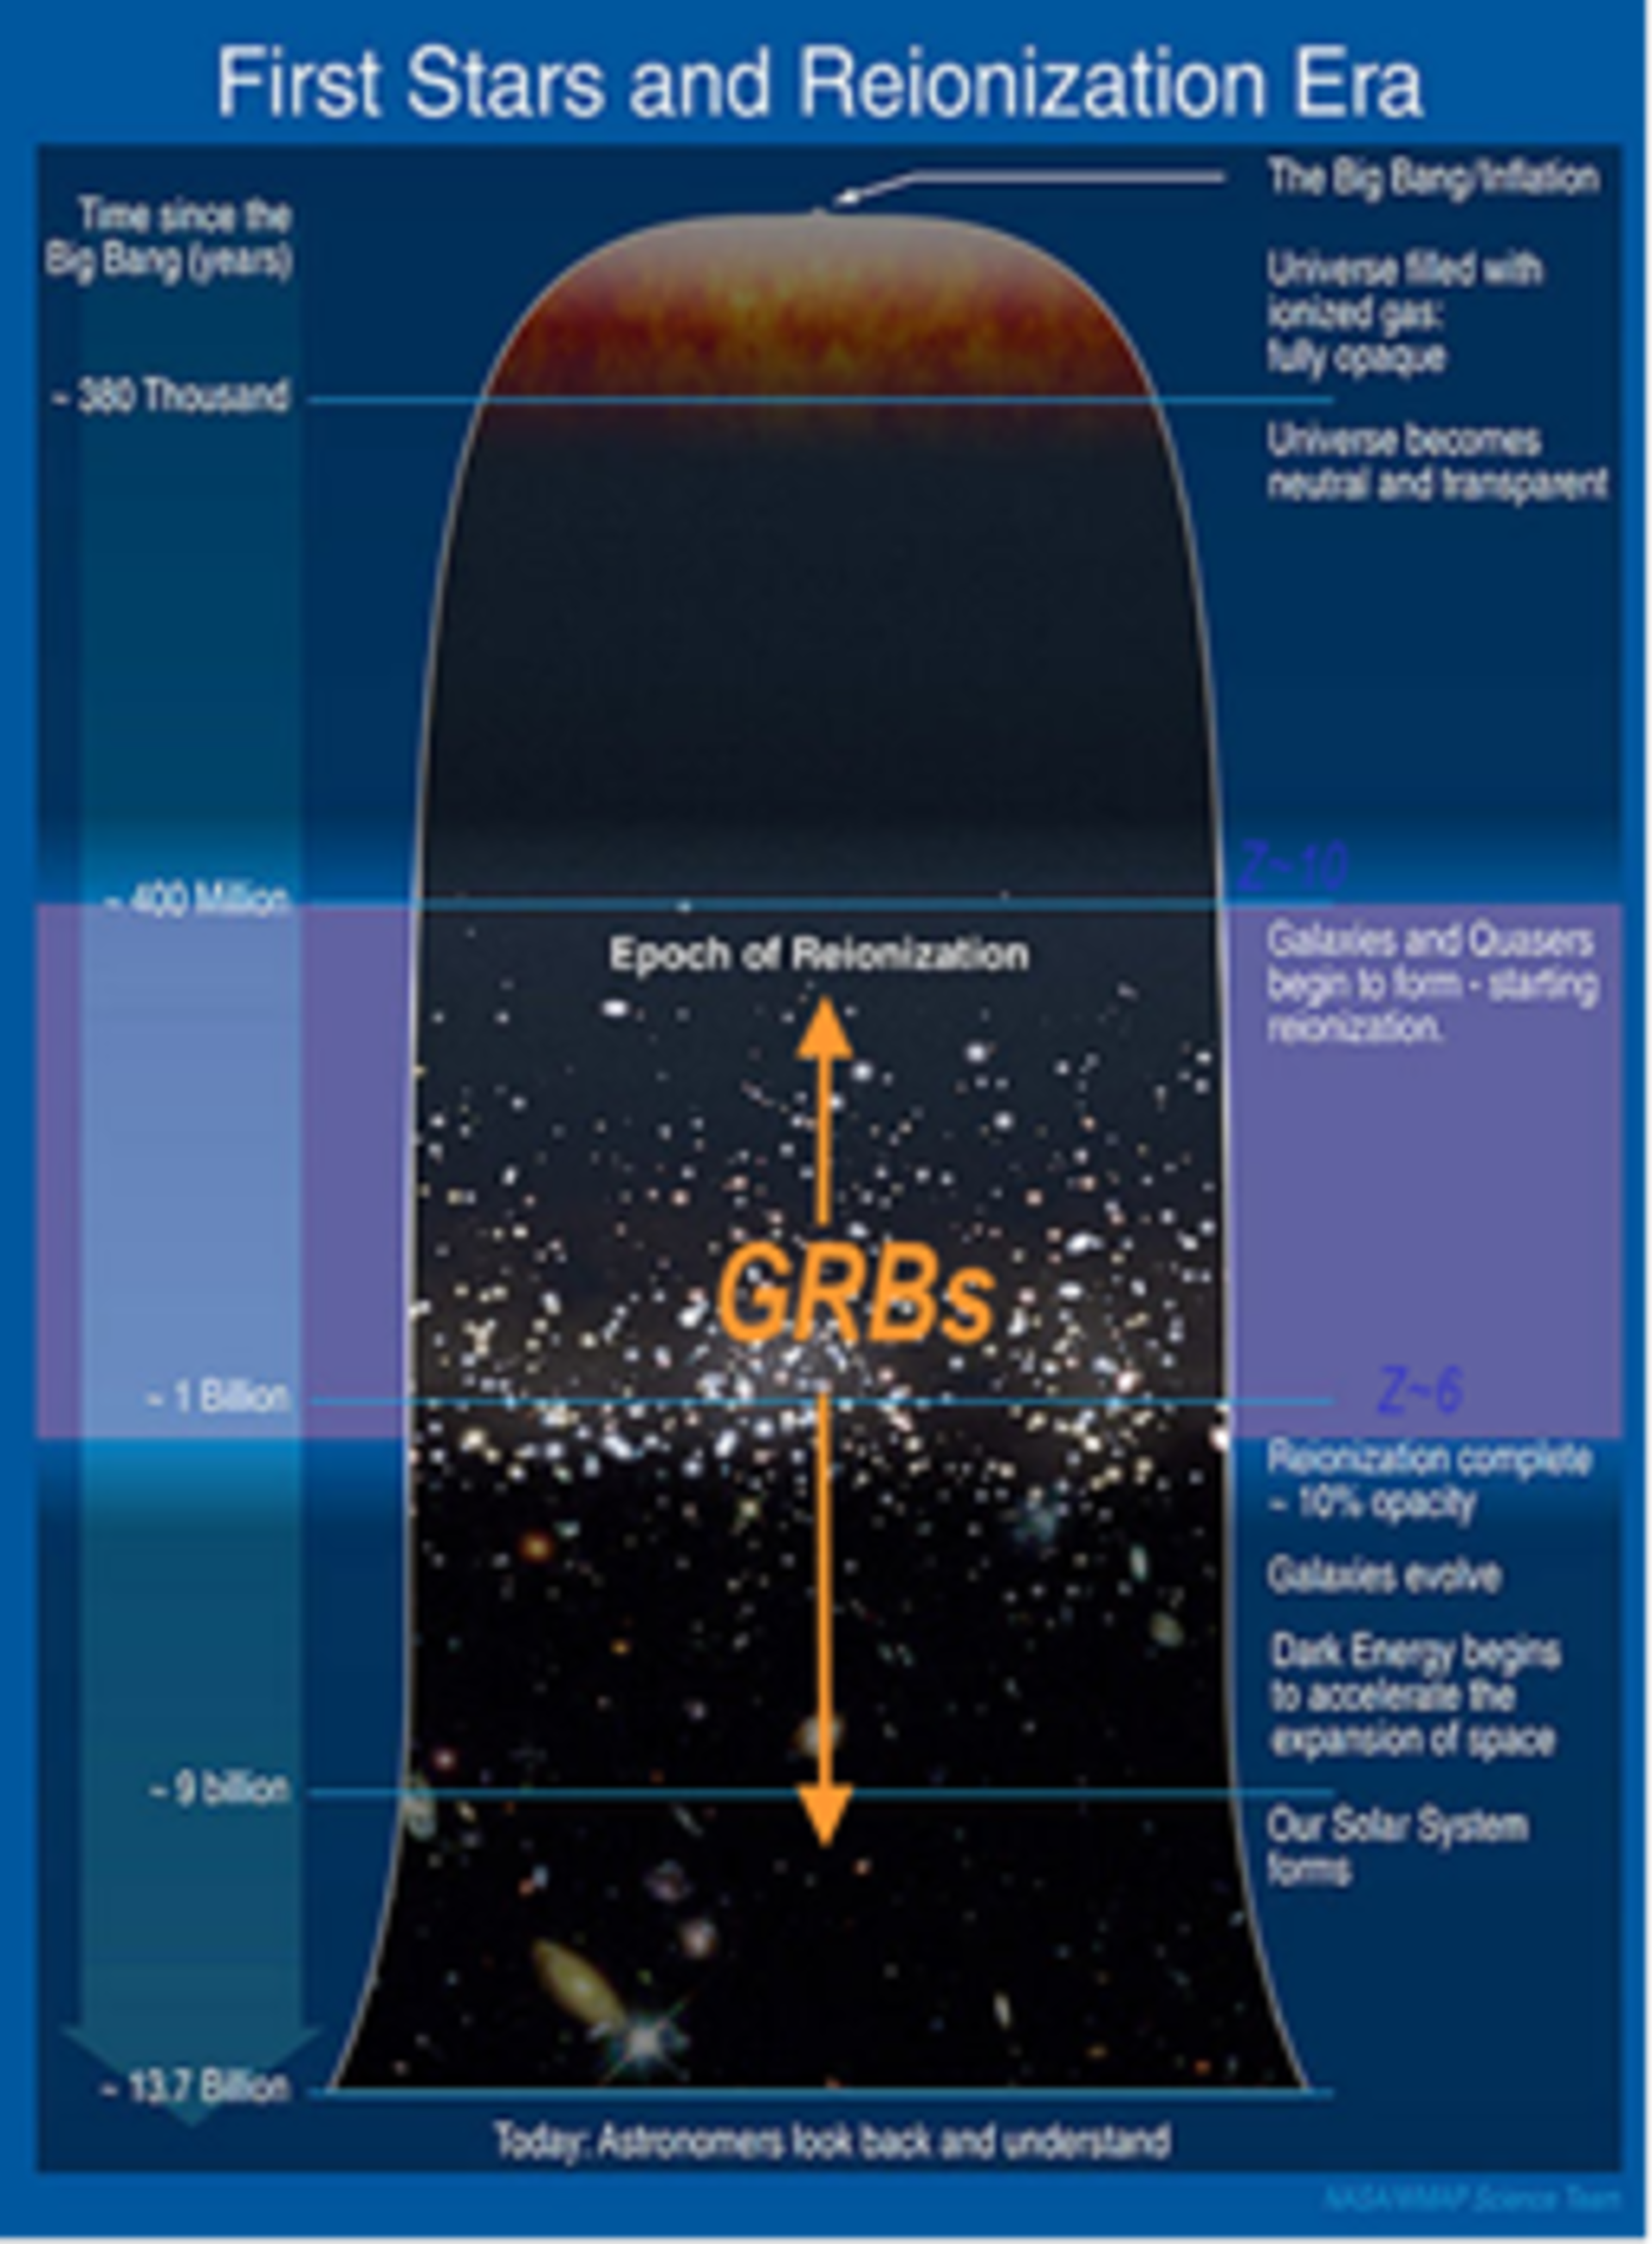 Gamma ray bursts in the early Universe